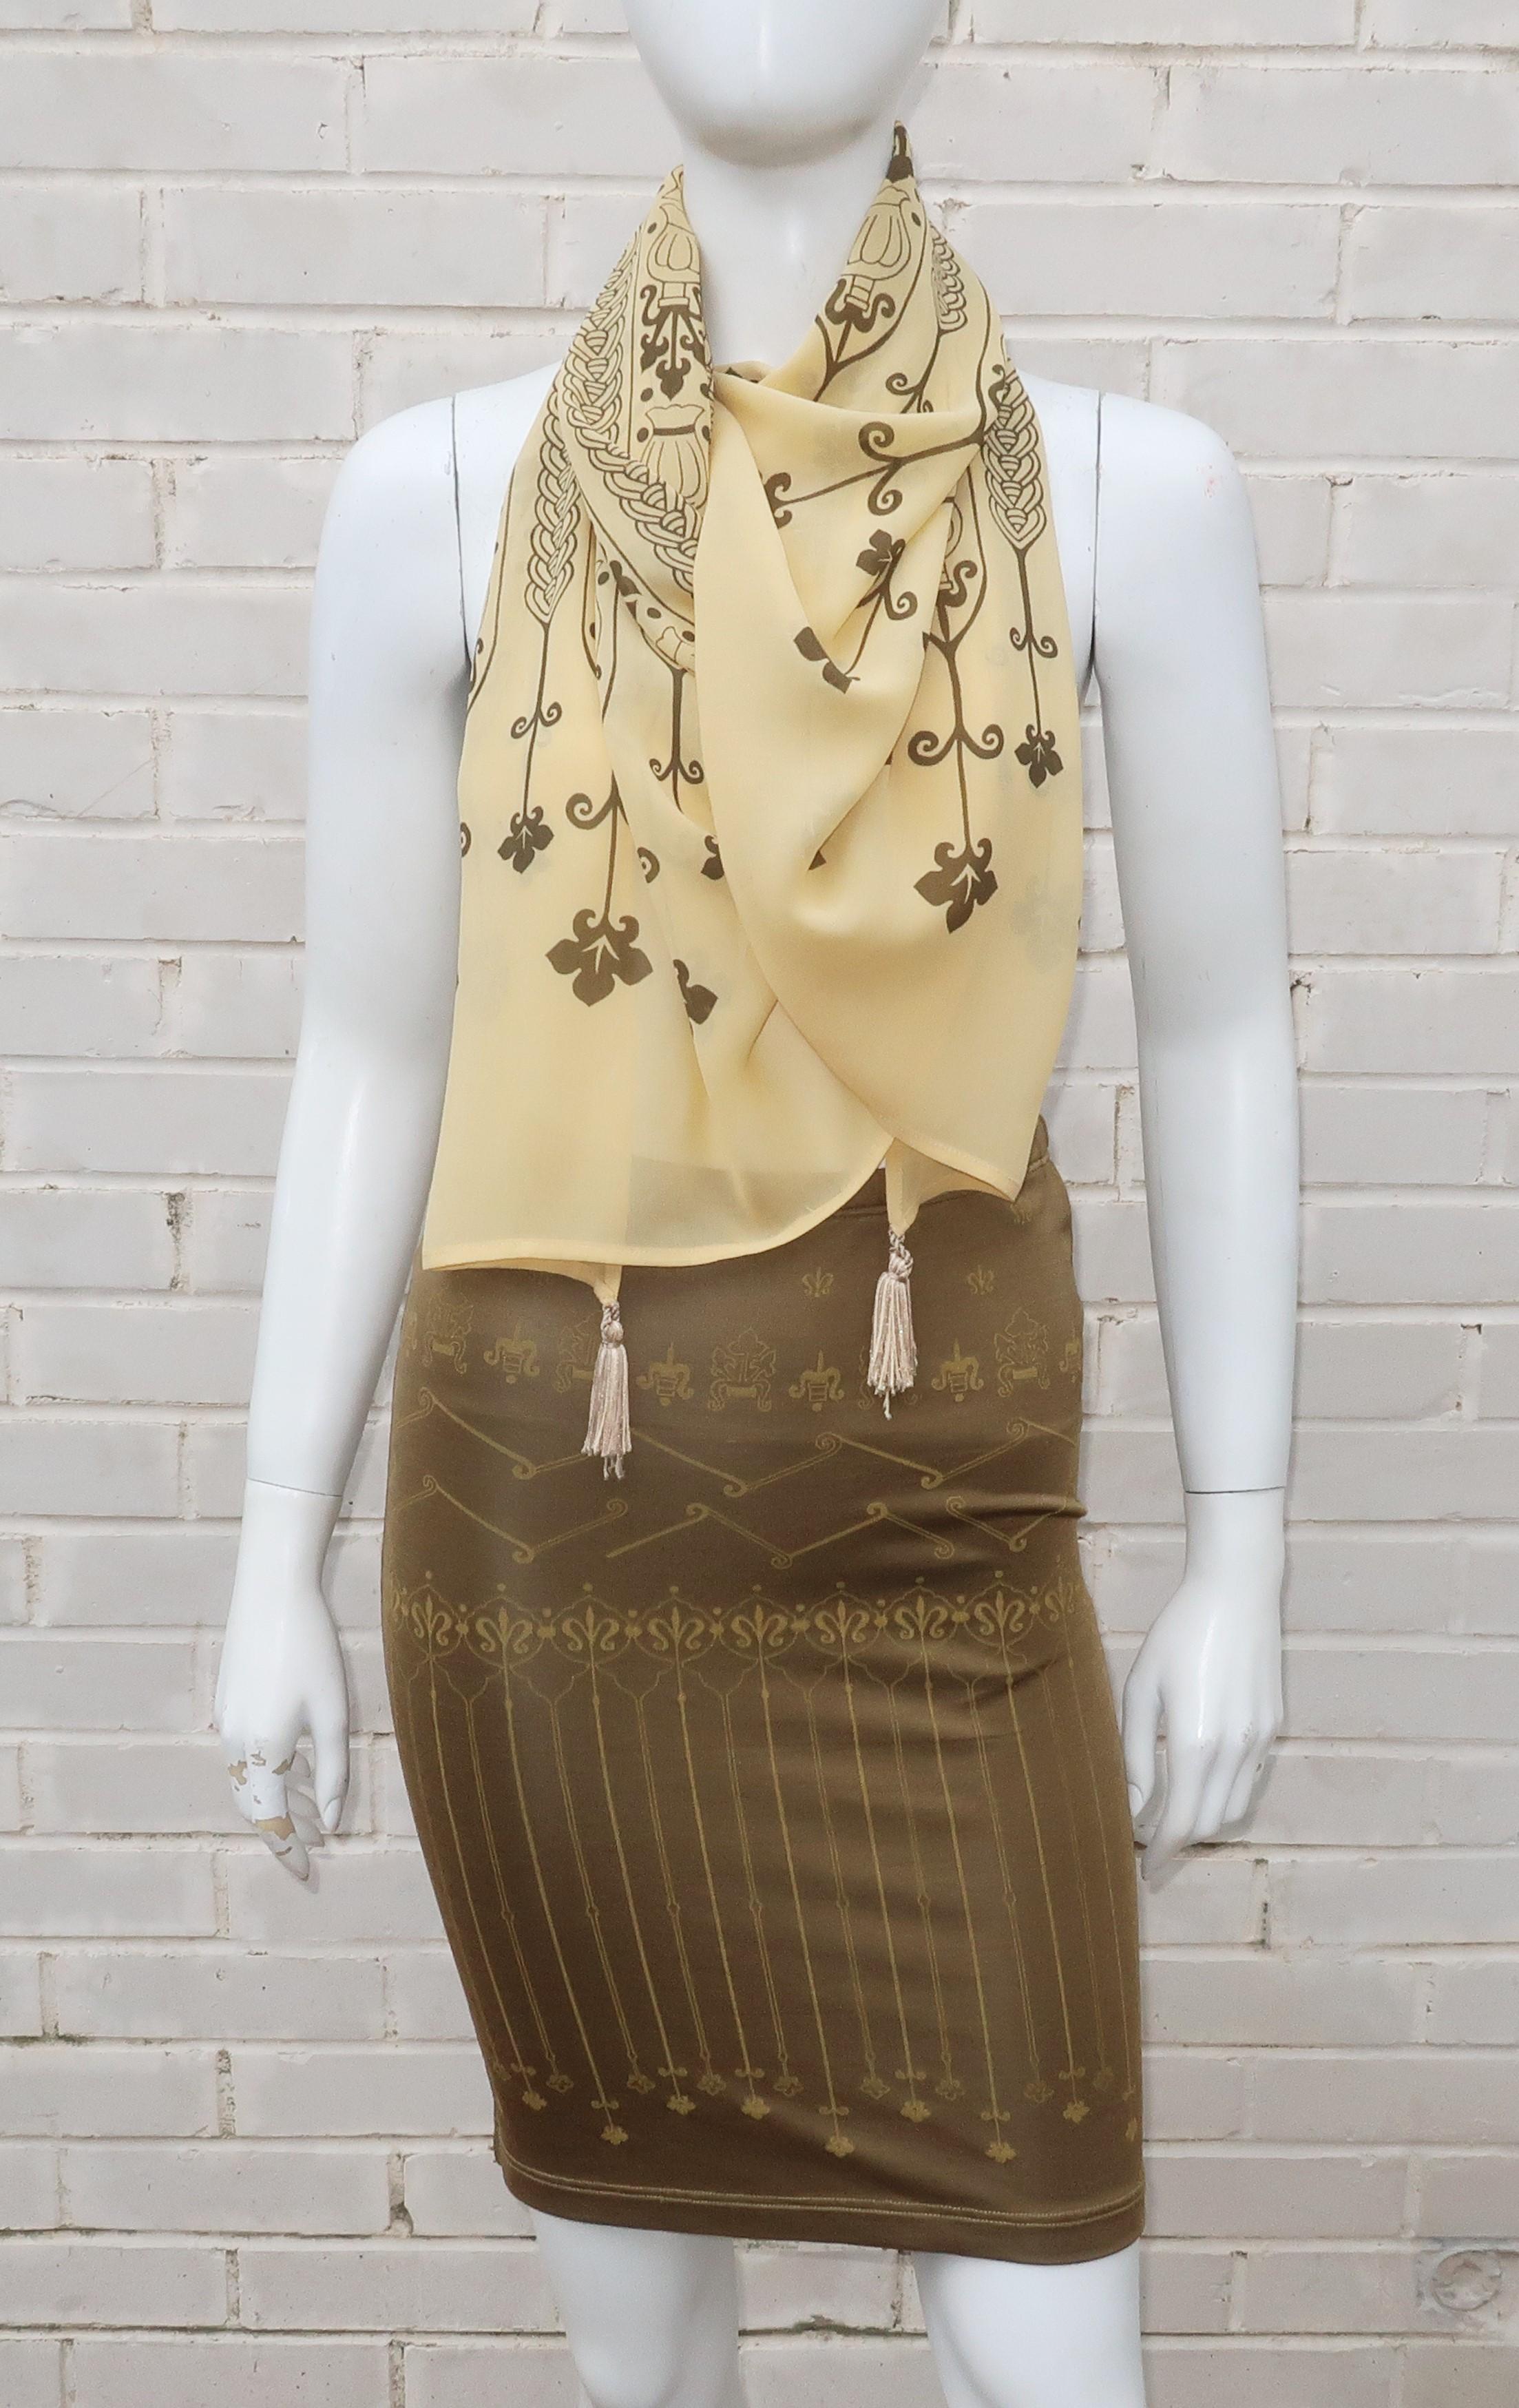 This Italian ensemble by Crimson puts style into spandex!  The body conscious stretch skirt is a slinky jersey fabric consisting of rayon and spandex with an Egyptian revival print all in a bronzed brown tone.  The coordinating scarf is a buttery